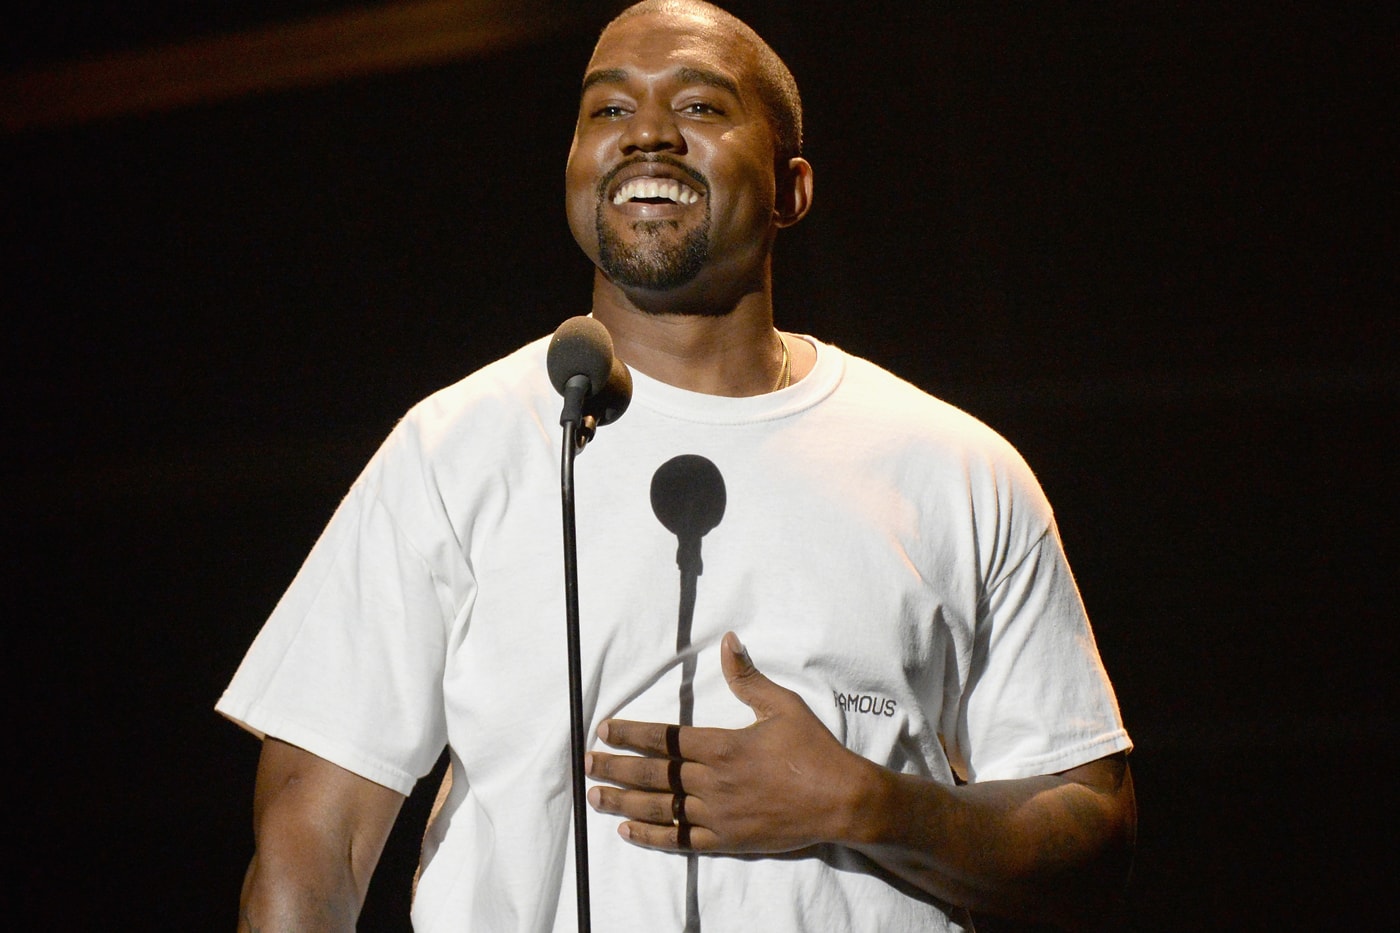 kanye-west-shares-new-the-life-of-pablo-song-saint-pablo